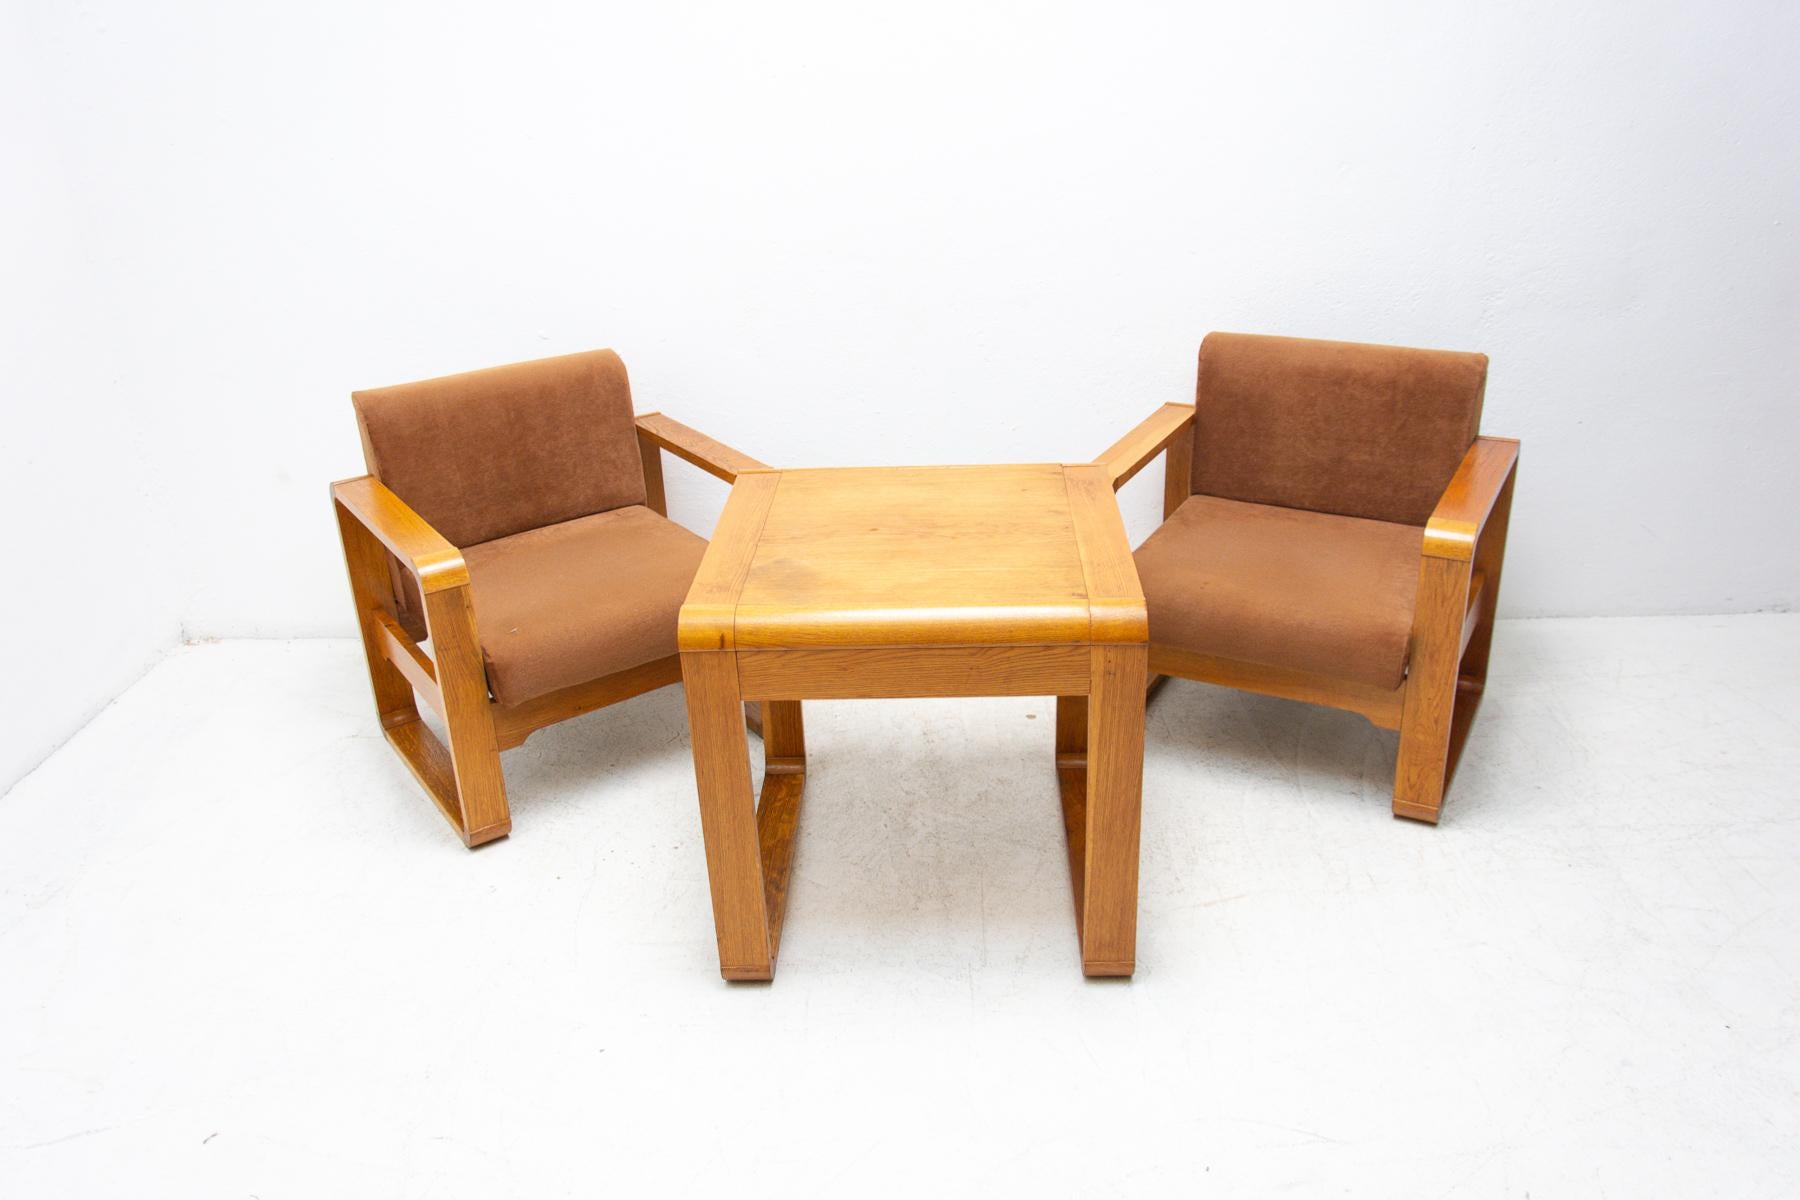 A pair of armchairs made in the 1970s for the meeting room of a Prague Hotel. The chairs are made of beech wood and have original upholstery. This is a very interesting design. The chairs are in their original preserved condition without damage,